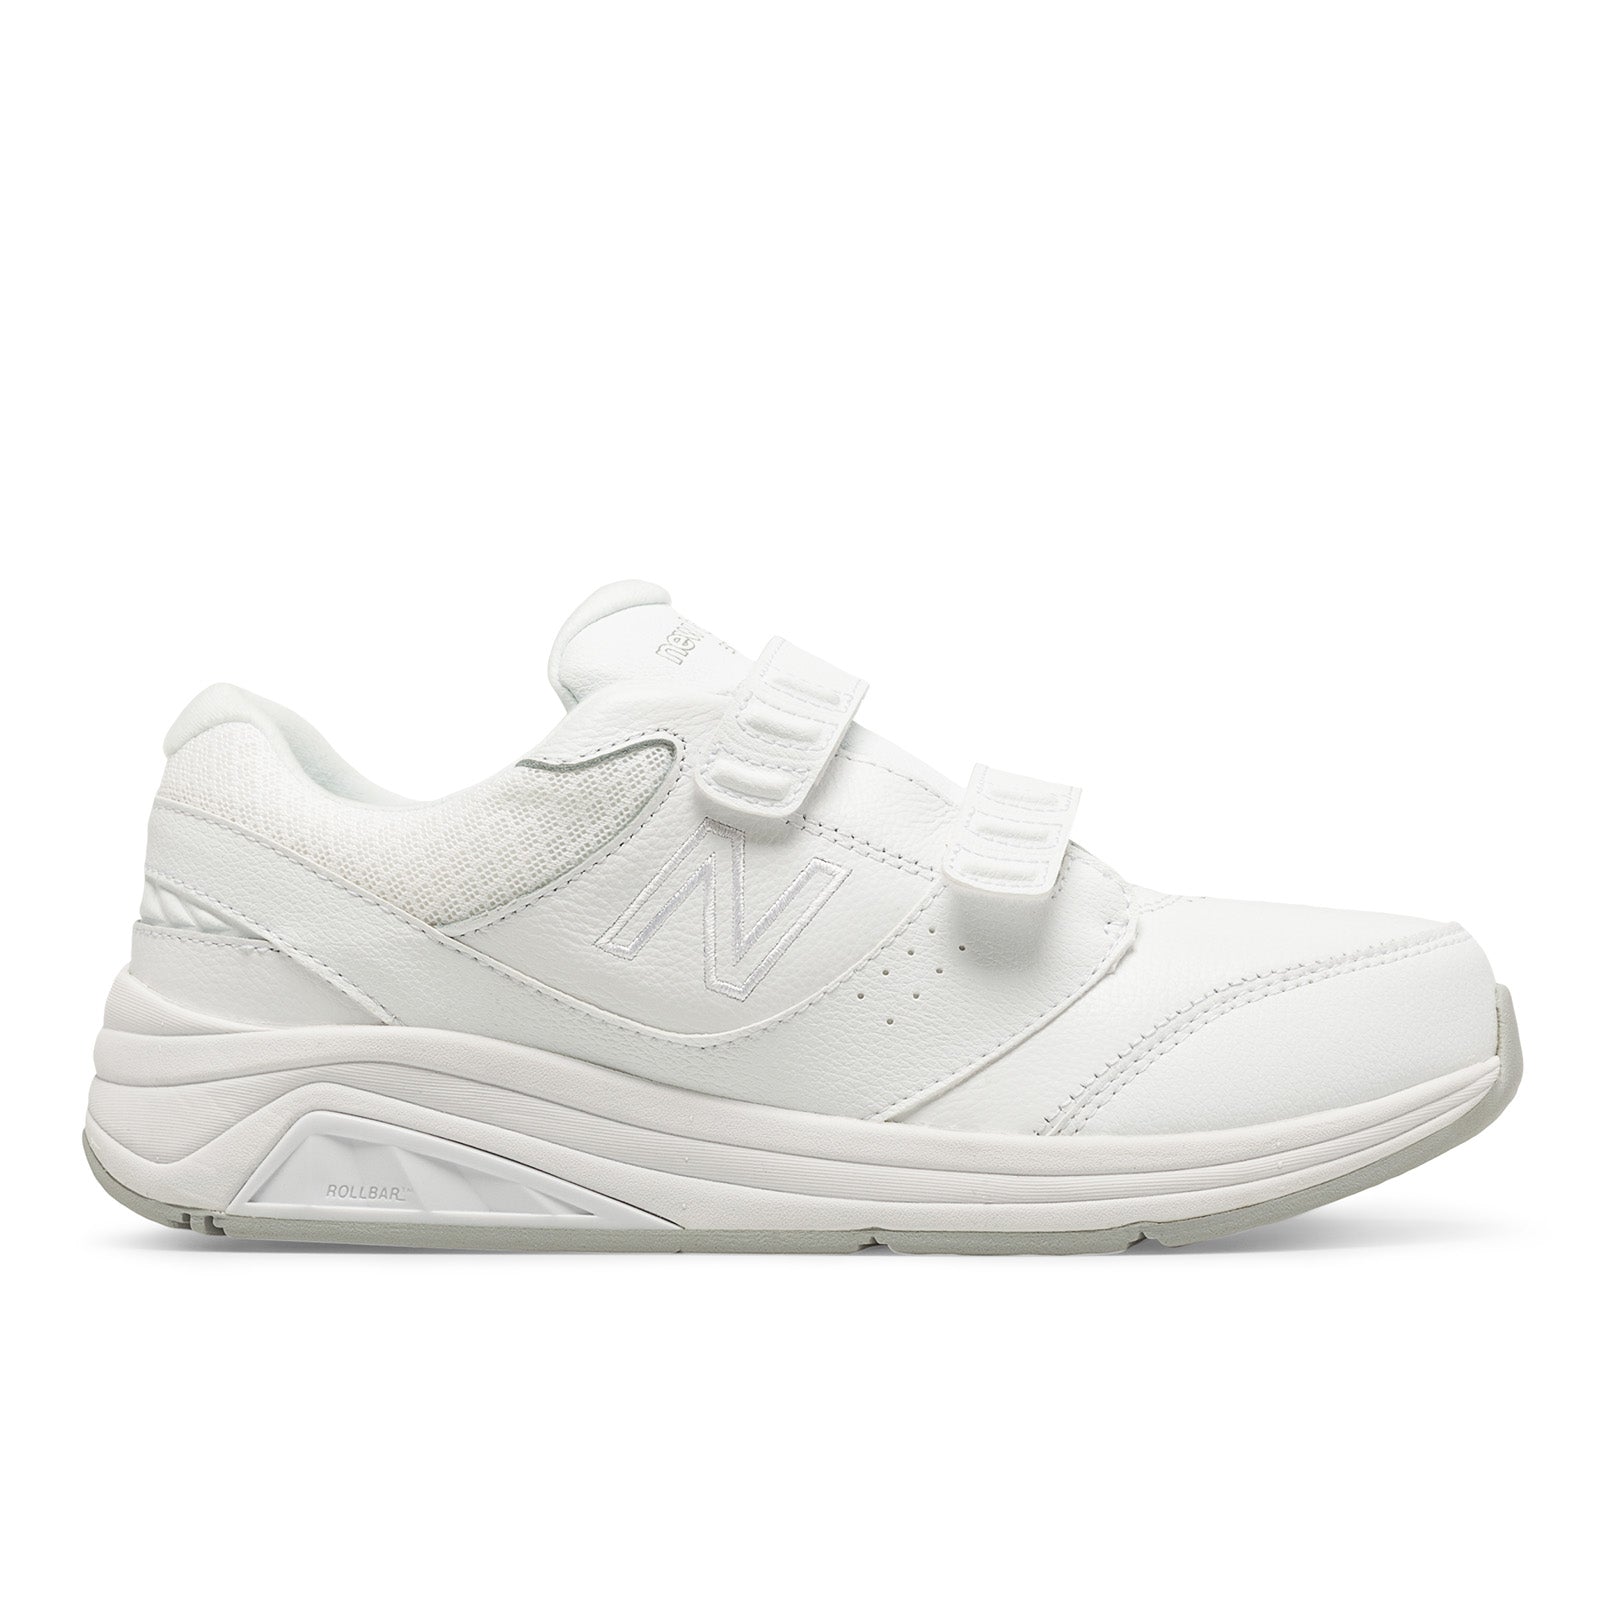 New Balance Women's Hook and Loop Leather 928v3 Walking Shoes in WHITE